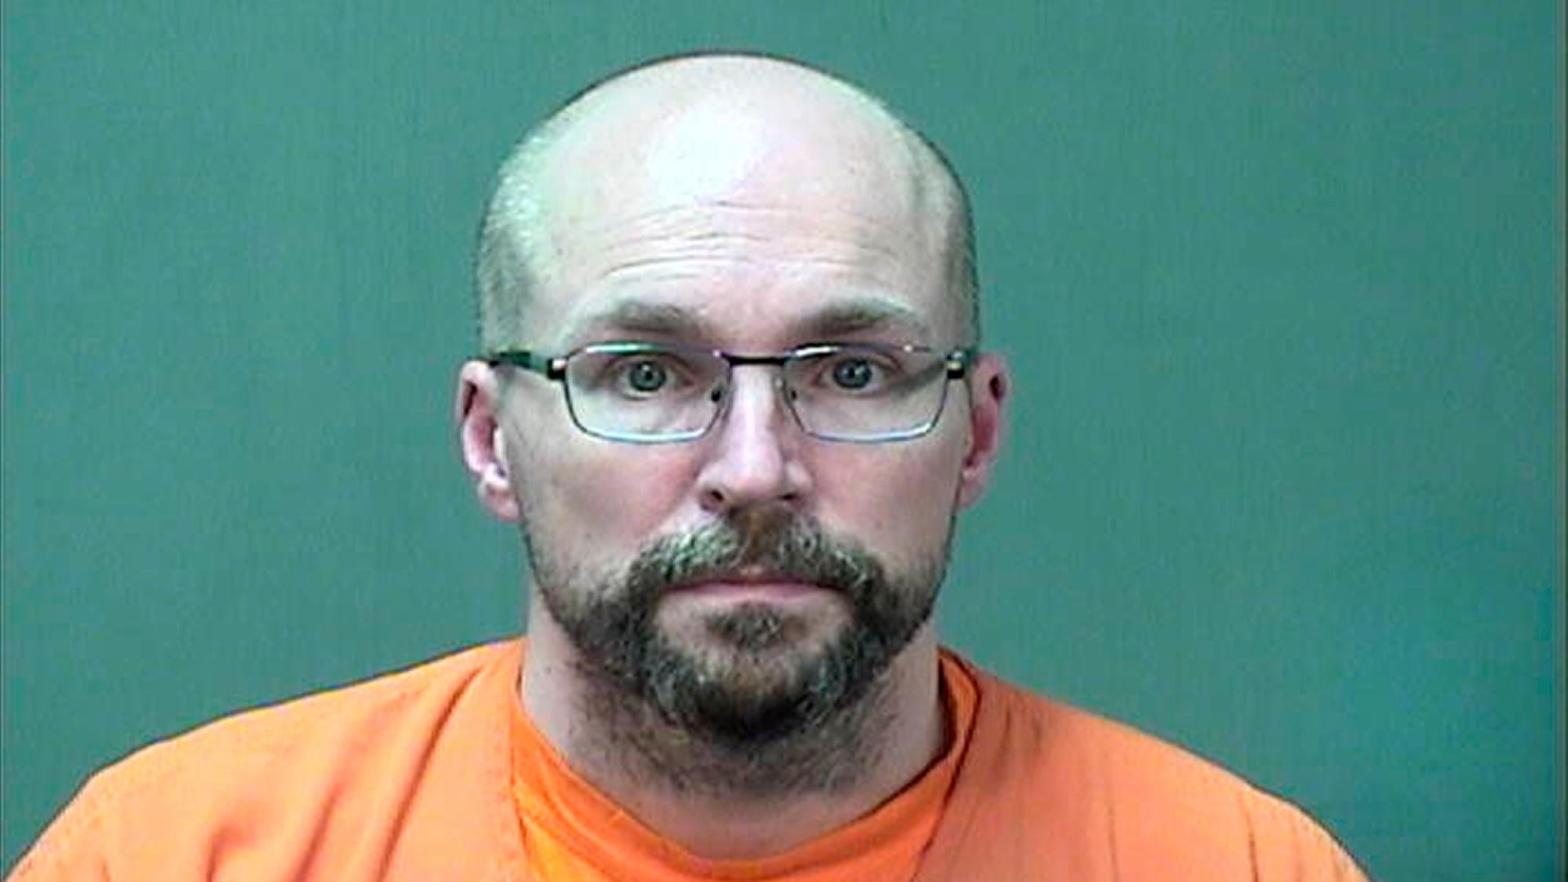 A booking photo provided by the Ozaukee County Sheriff's Office of Steven Brandenburg, taken Monday, Jan. 4, 2021  (Photo: Ozaukee County Sheriff via AP, AP)